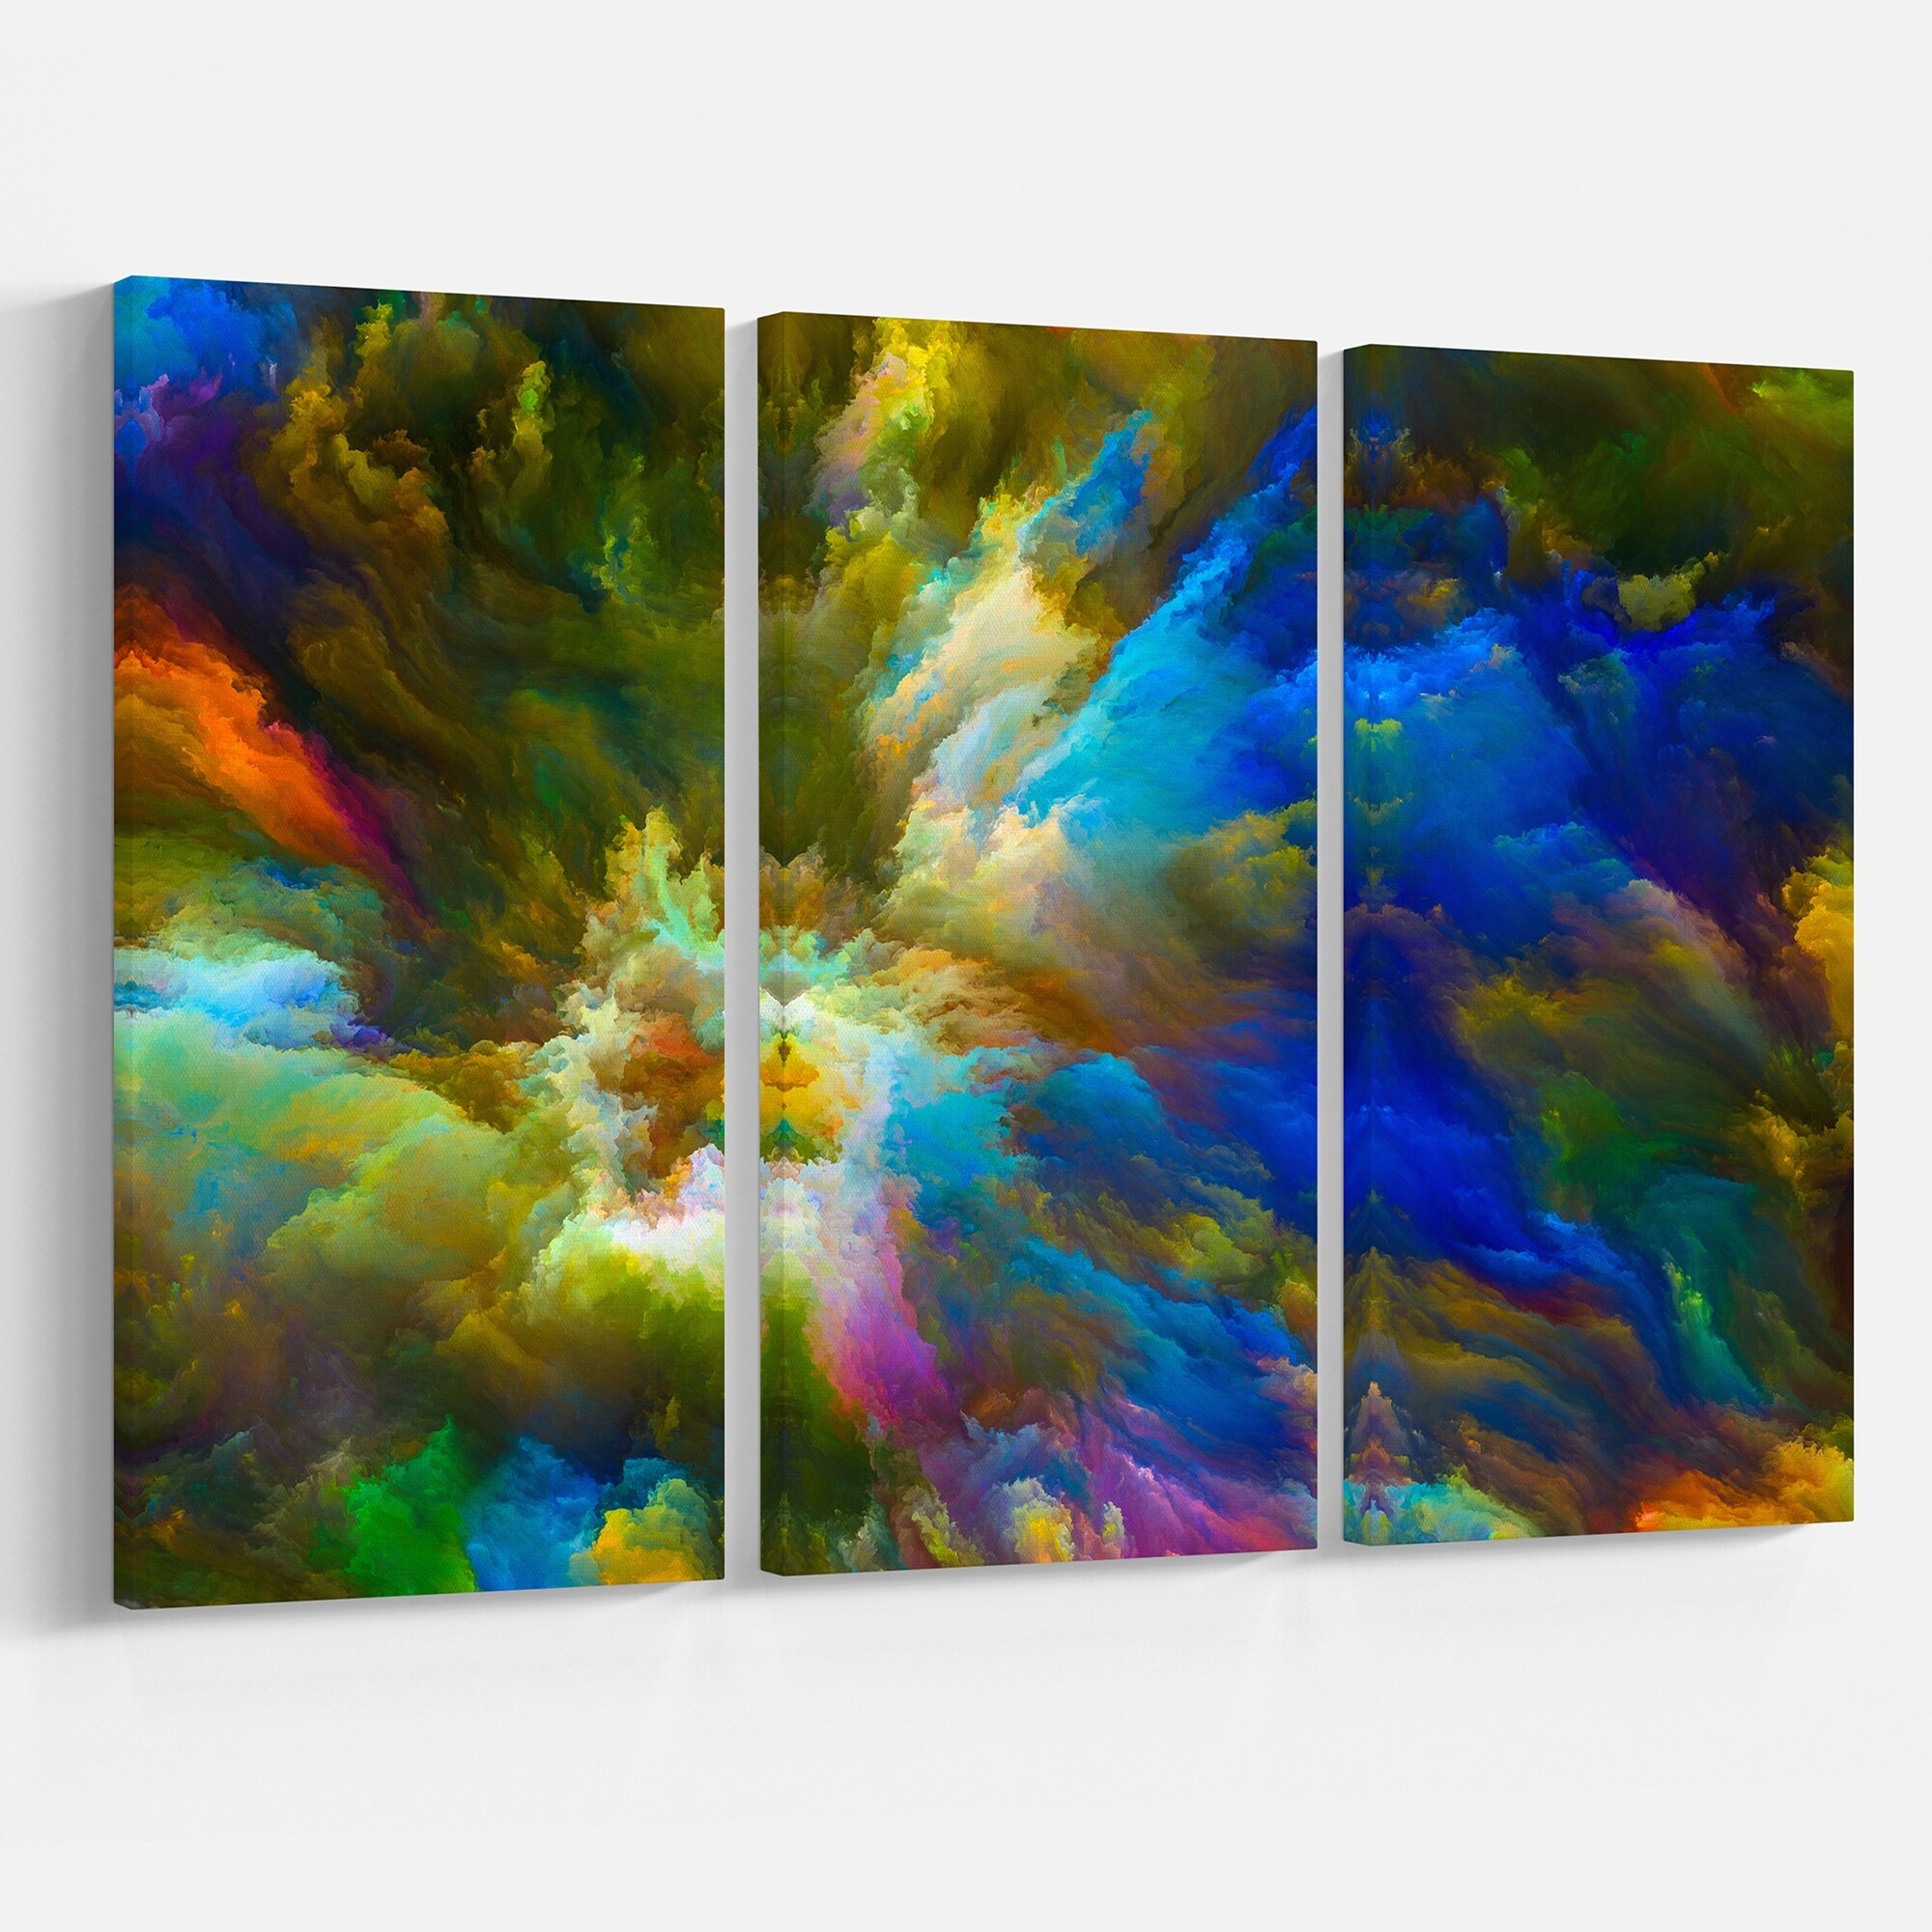 Designart Game of Imagination Contemporary Art on Wrapped Canvas set -  36x28 - 3 Panels - Bed Bath & Beyond - 32979960